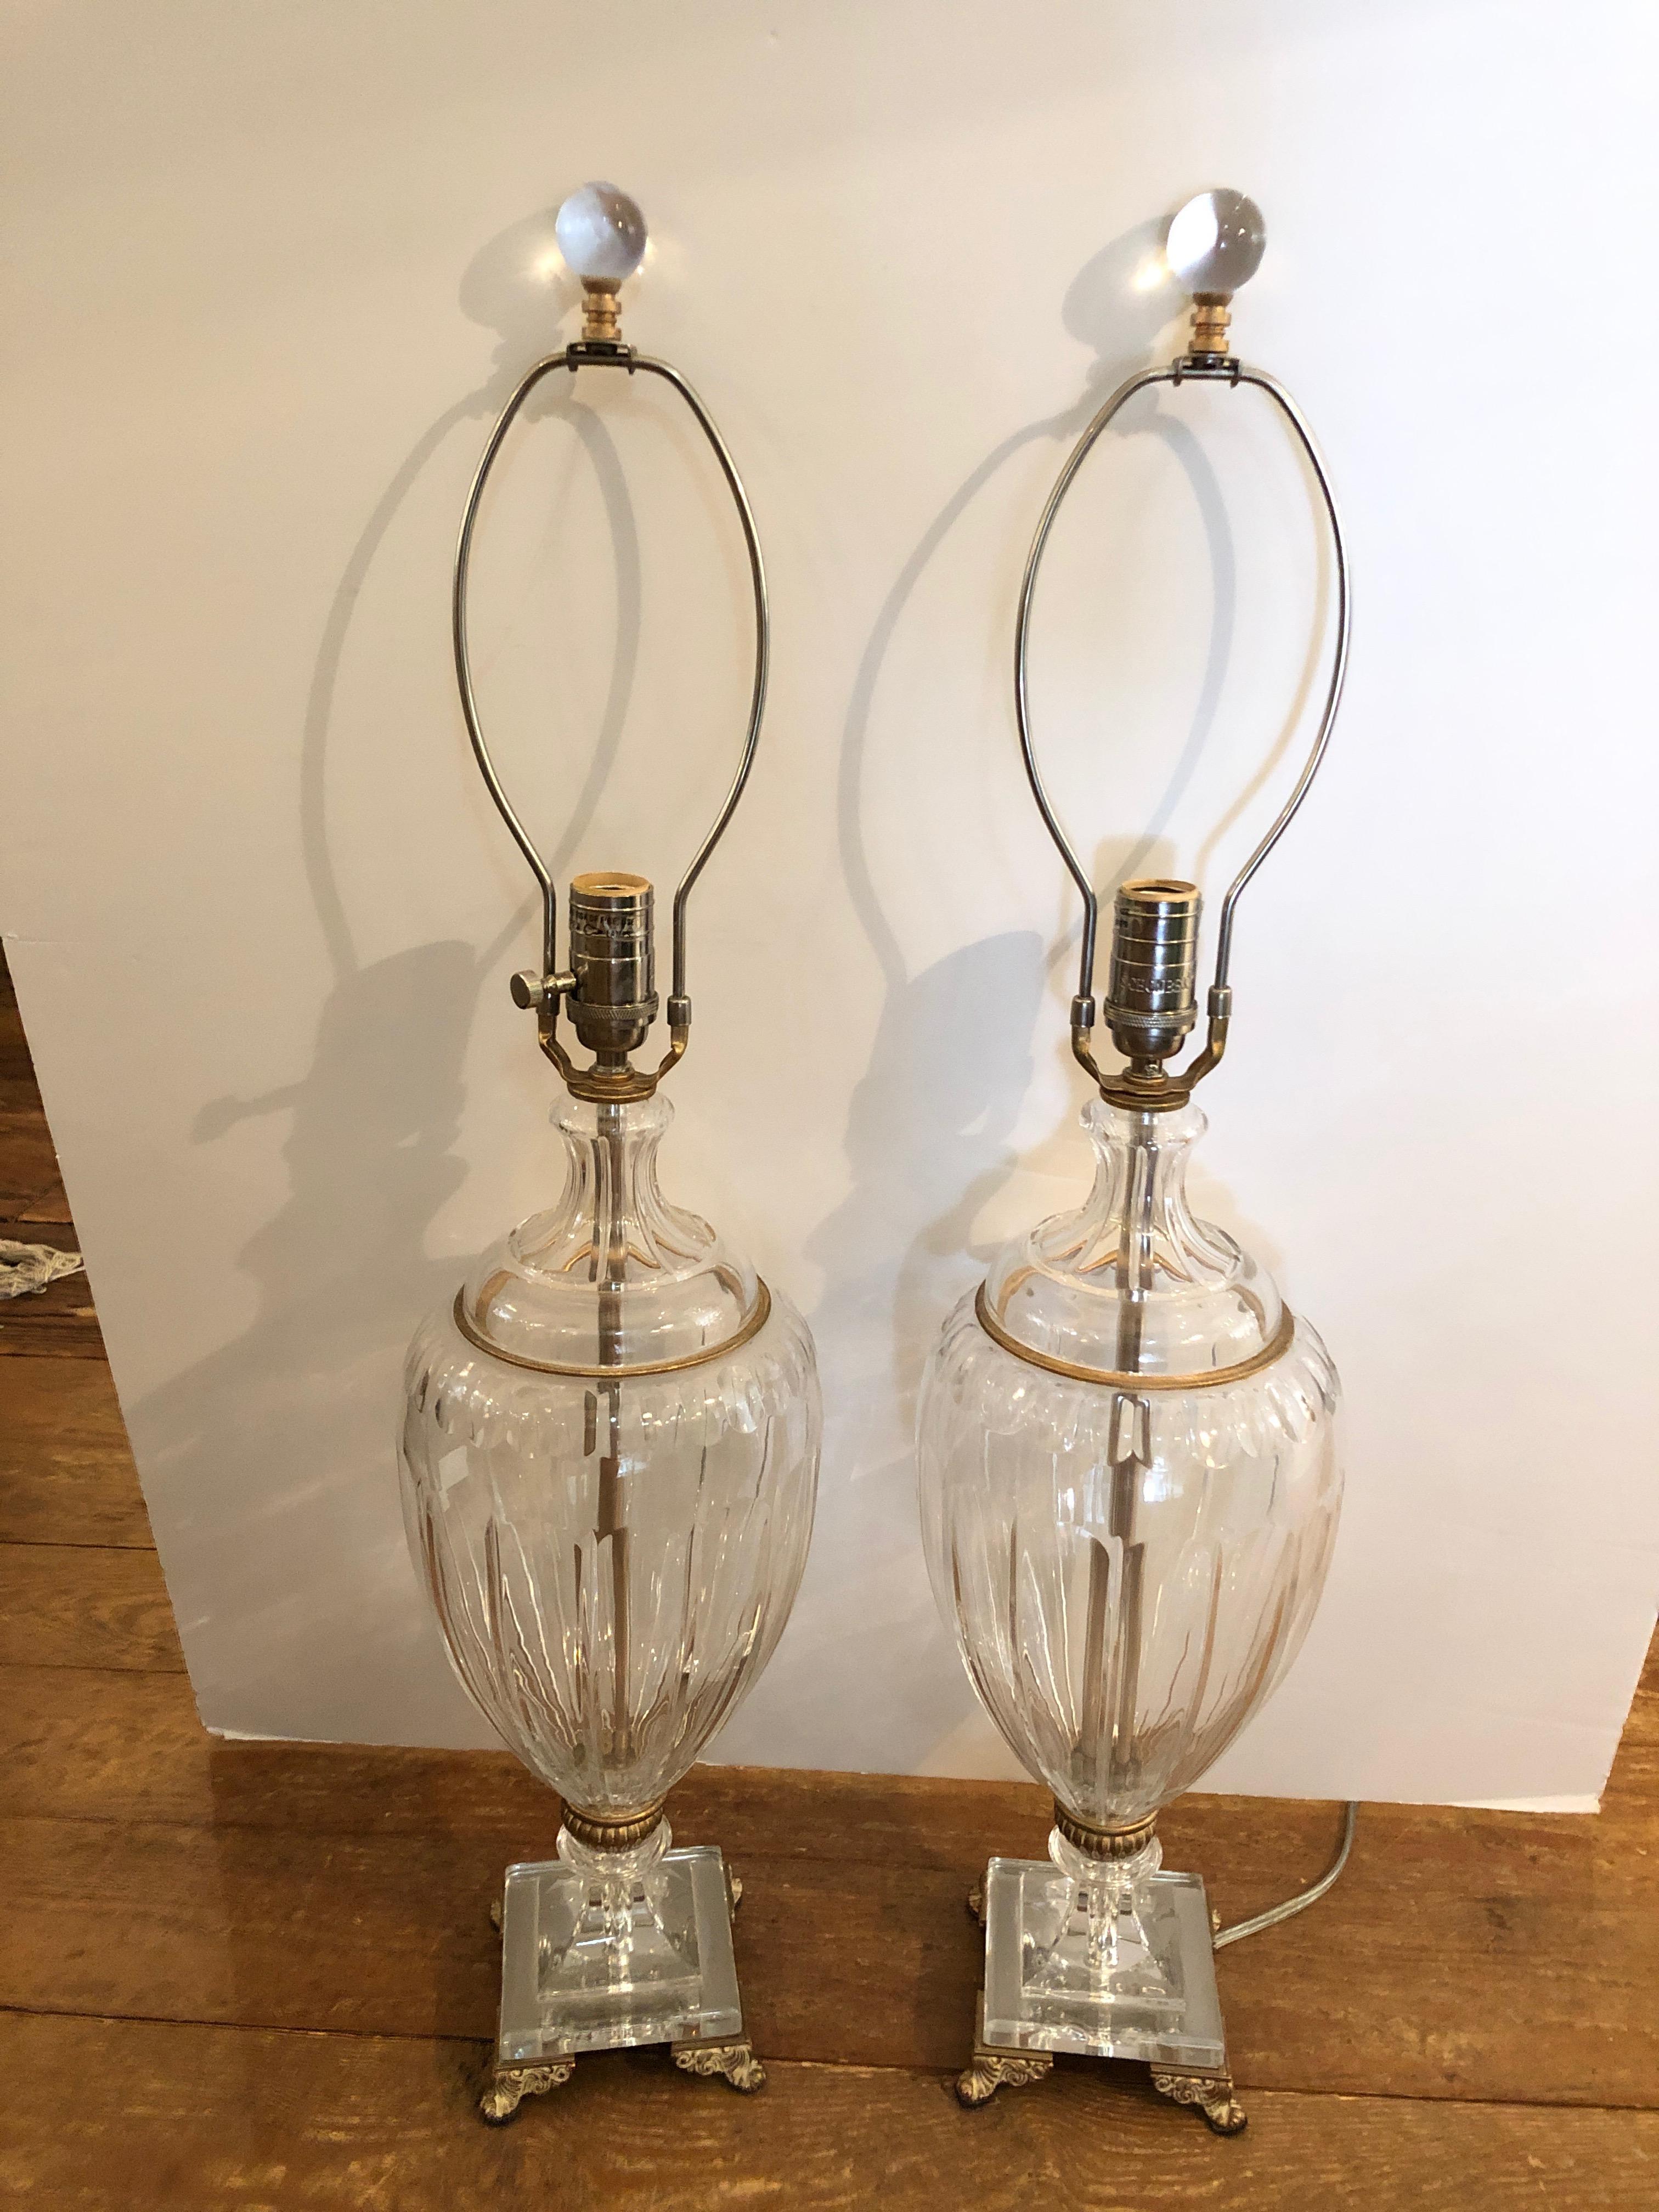 Two heavy cut crystal urn shaped table lamps marked Schonbek having pretty brass decorative embellishments and feet as well as lovely custom silk shades. Clear glass ball finials.
Urns are 19 H.